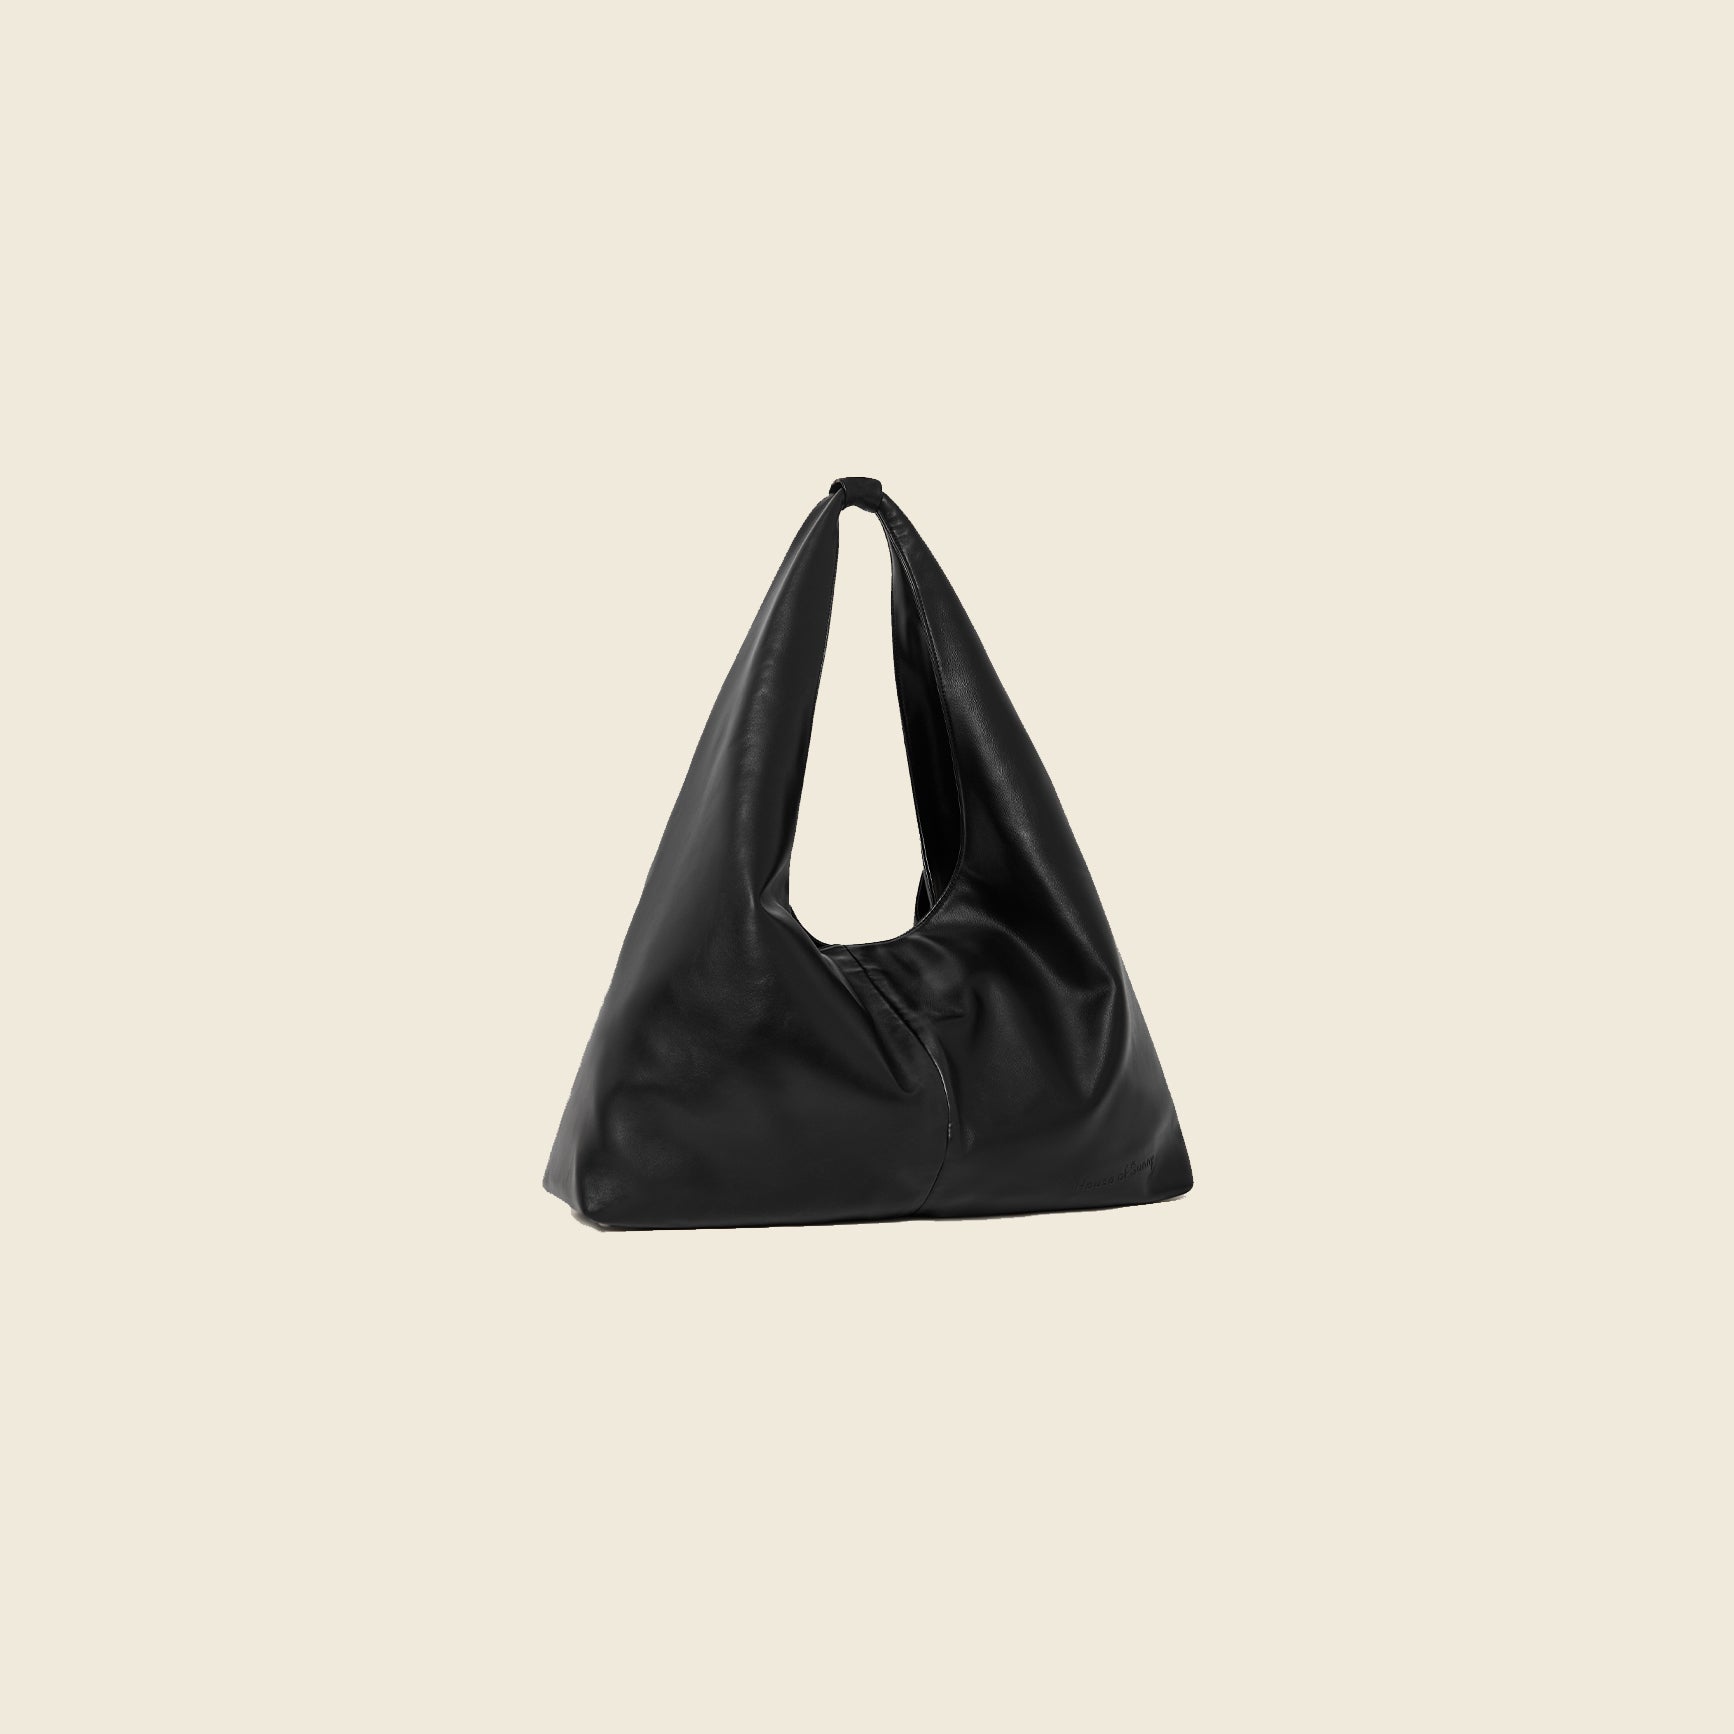 THE BIG SLING BAG | HOUSE OF SUNNY – House of Sunny